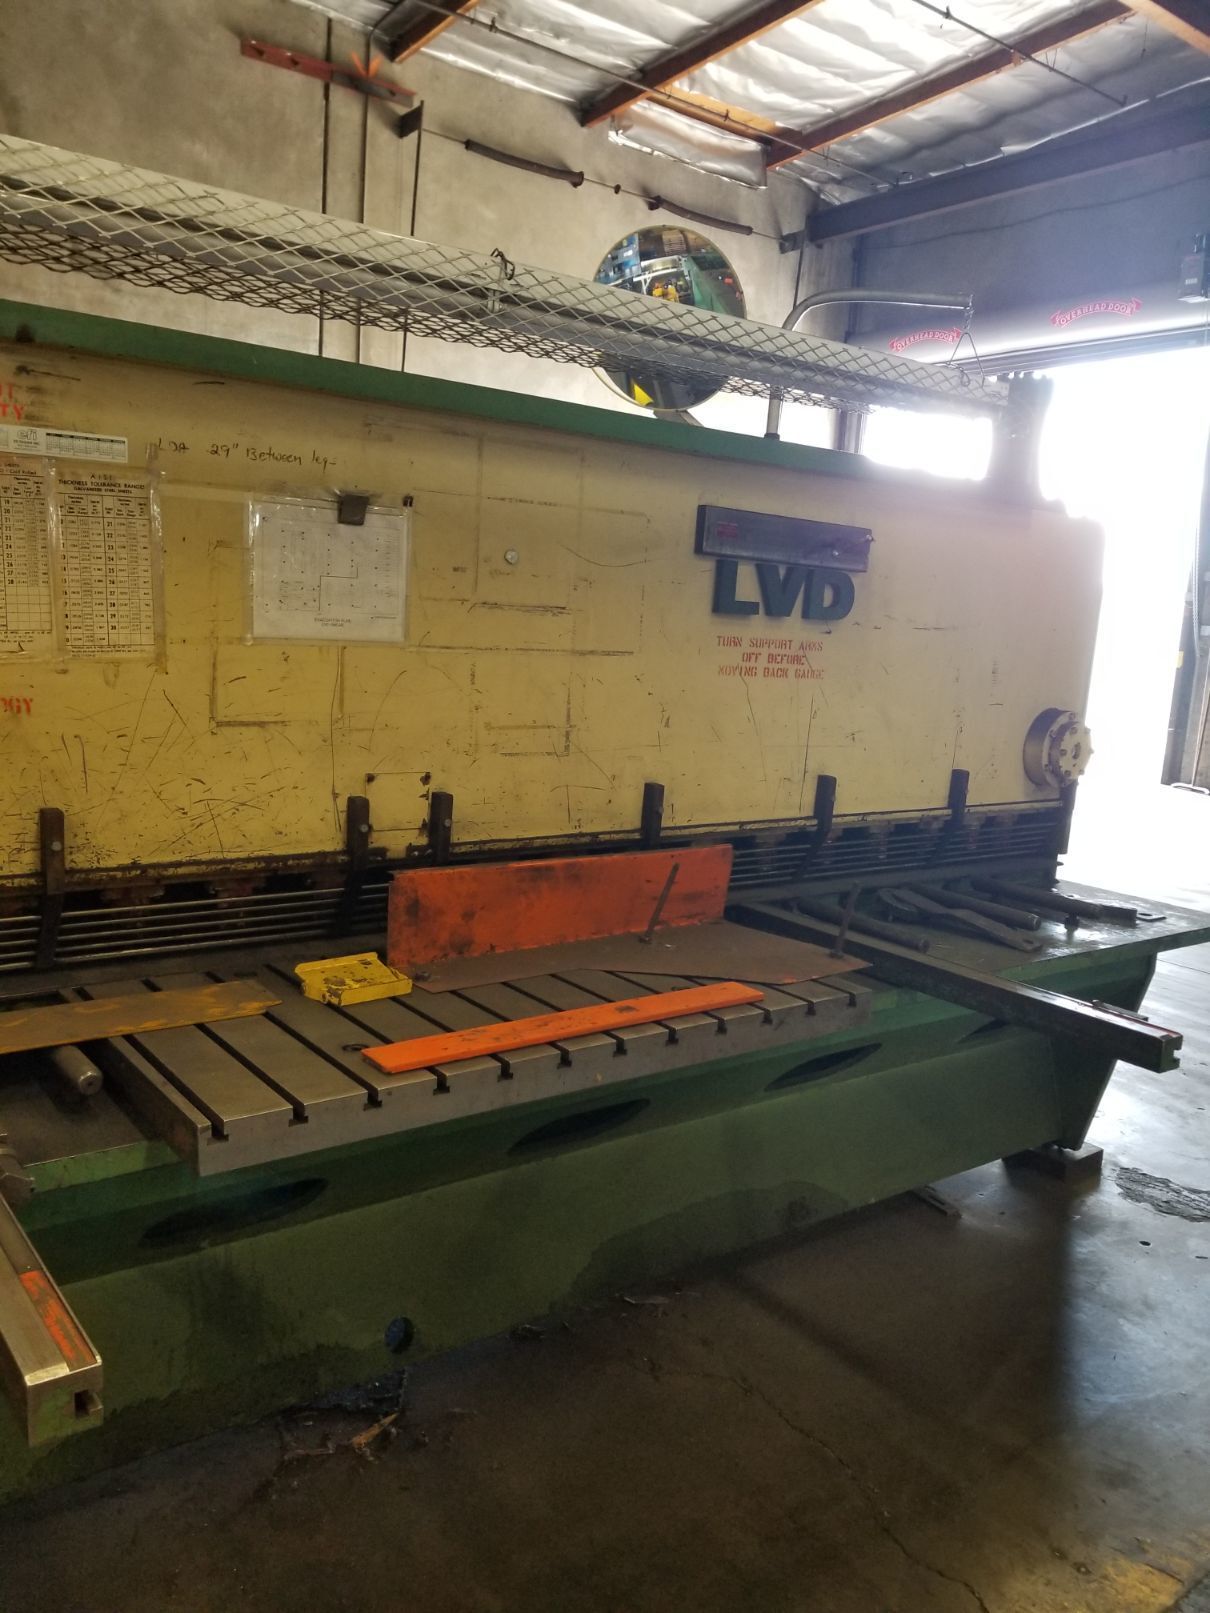 LVD CORPORATION 13-OH-25N Sold Equipment | MD Equipment Services LLC